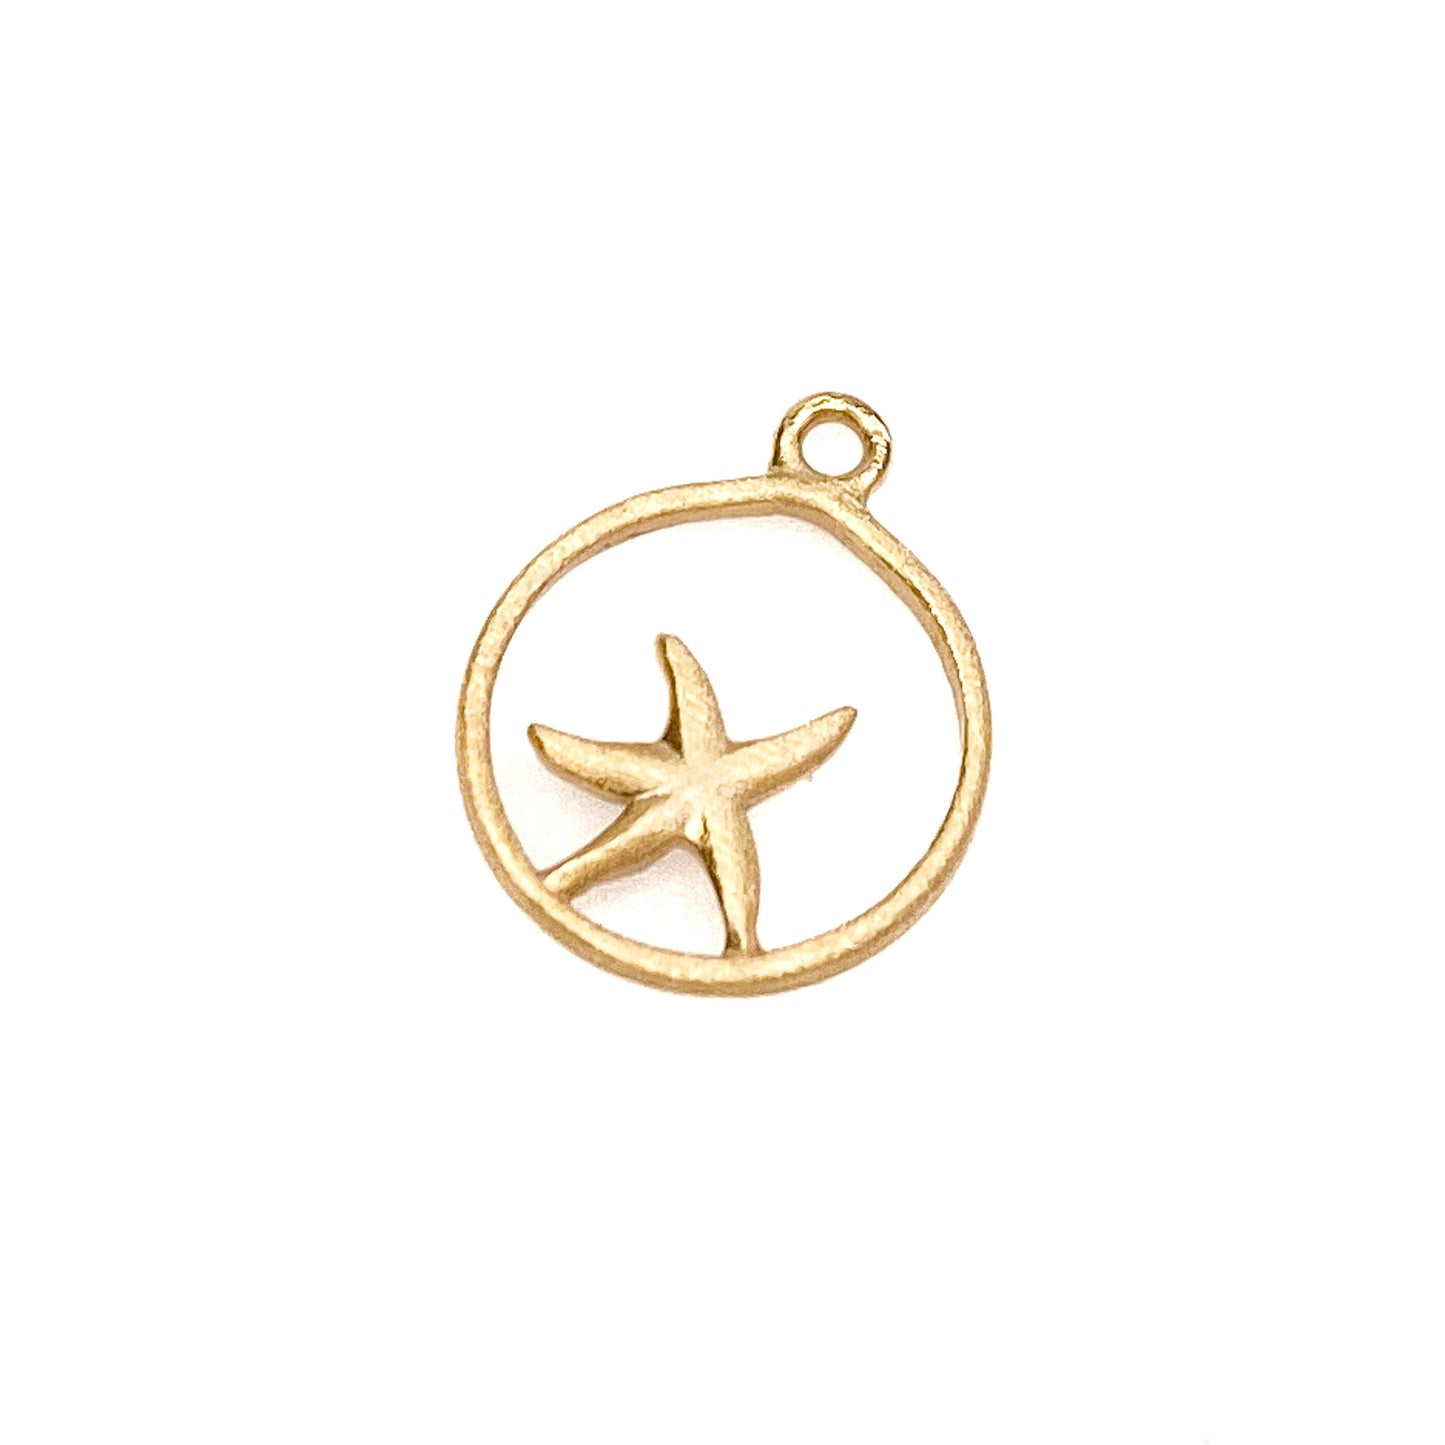 Starfish Charm in Frame (2 Metal Options Available) - 1 pc.